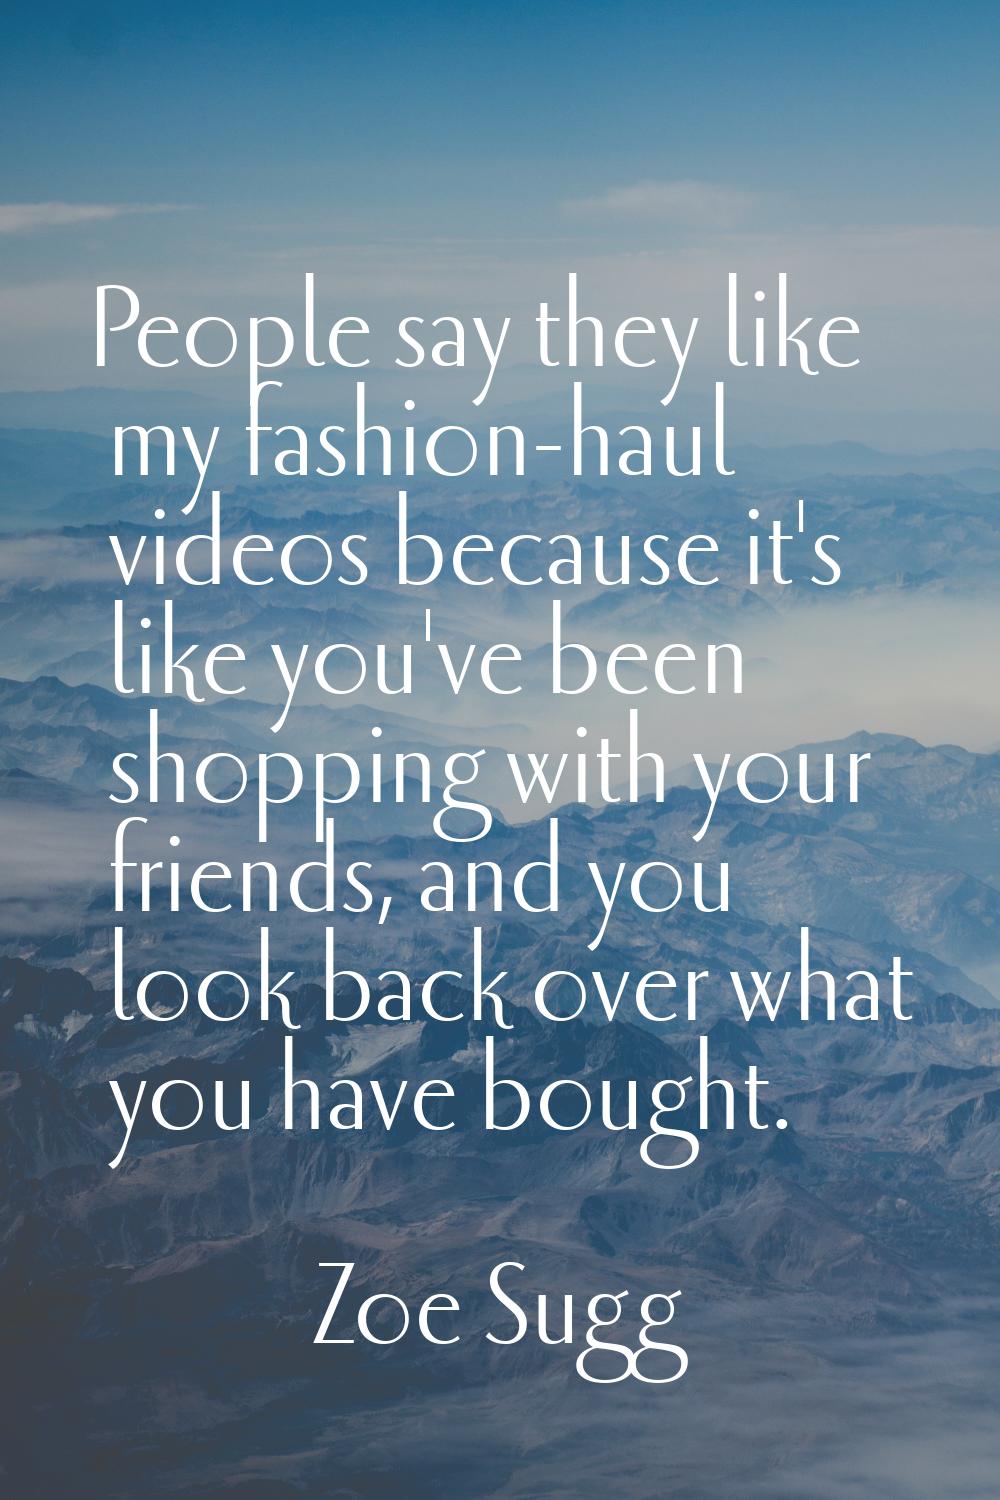 People say they like my fashion-haul videos because it's like you've been shopping with your friend